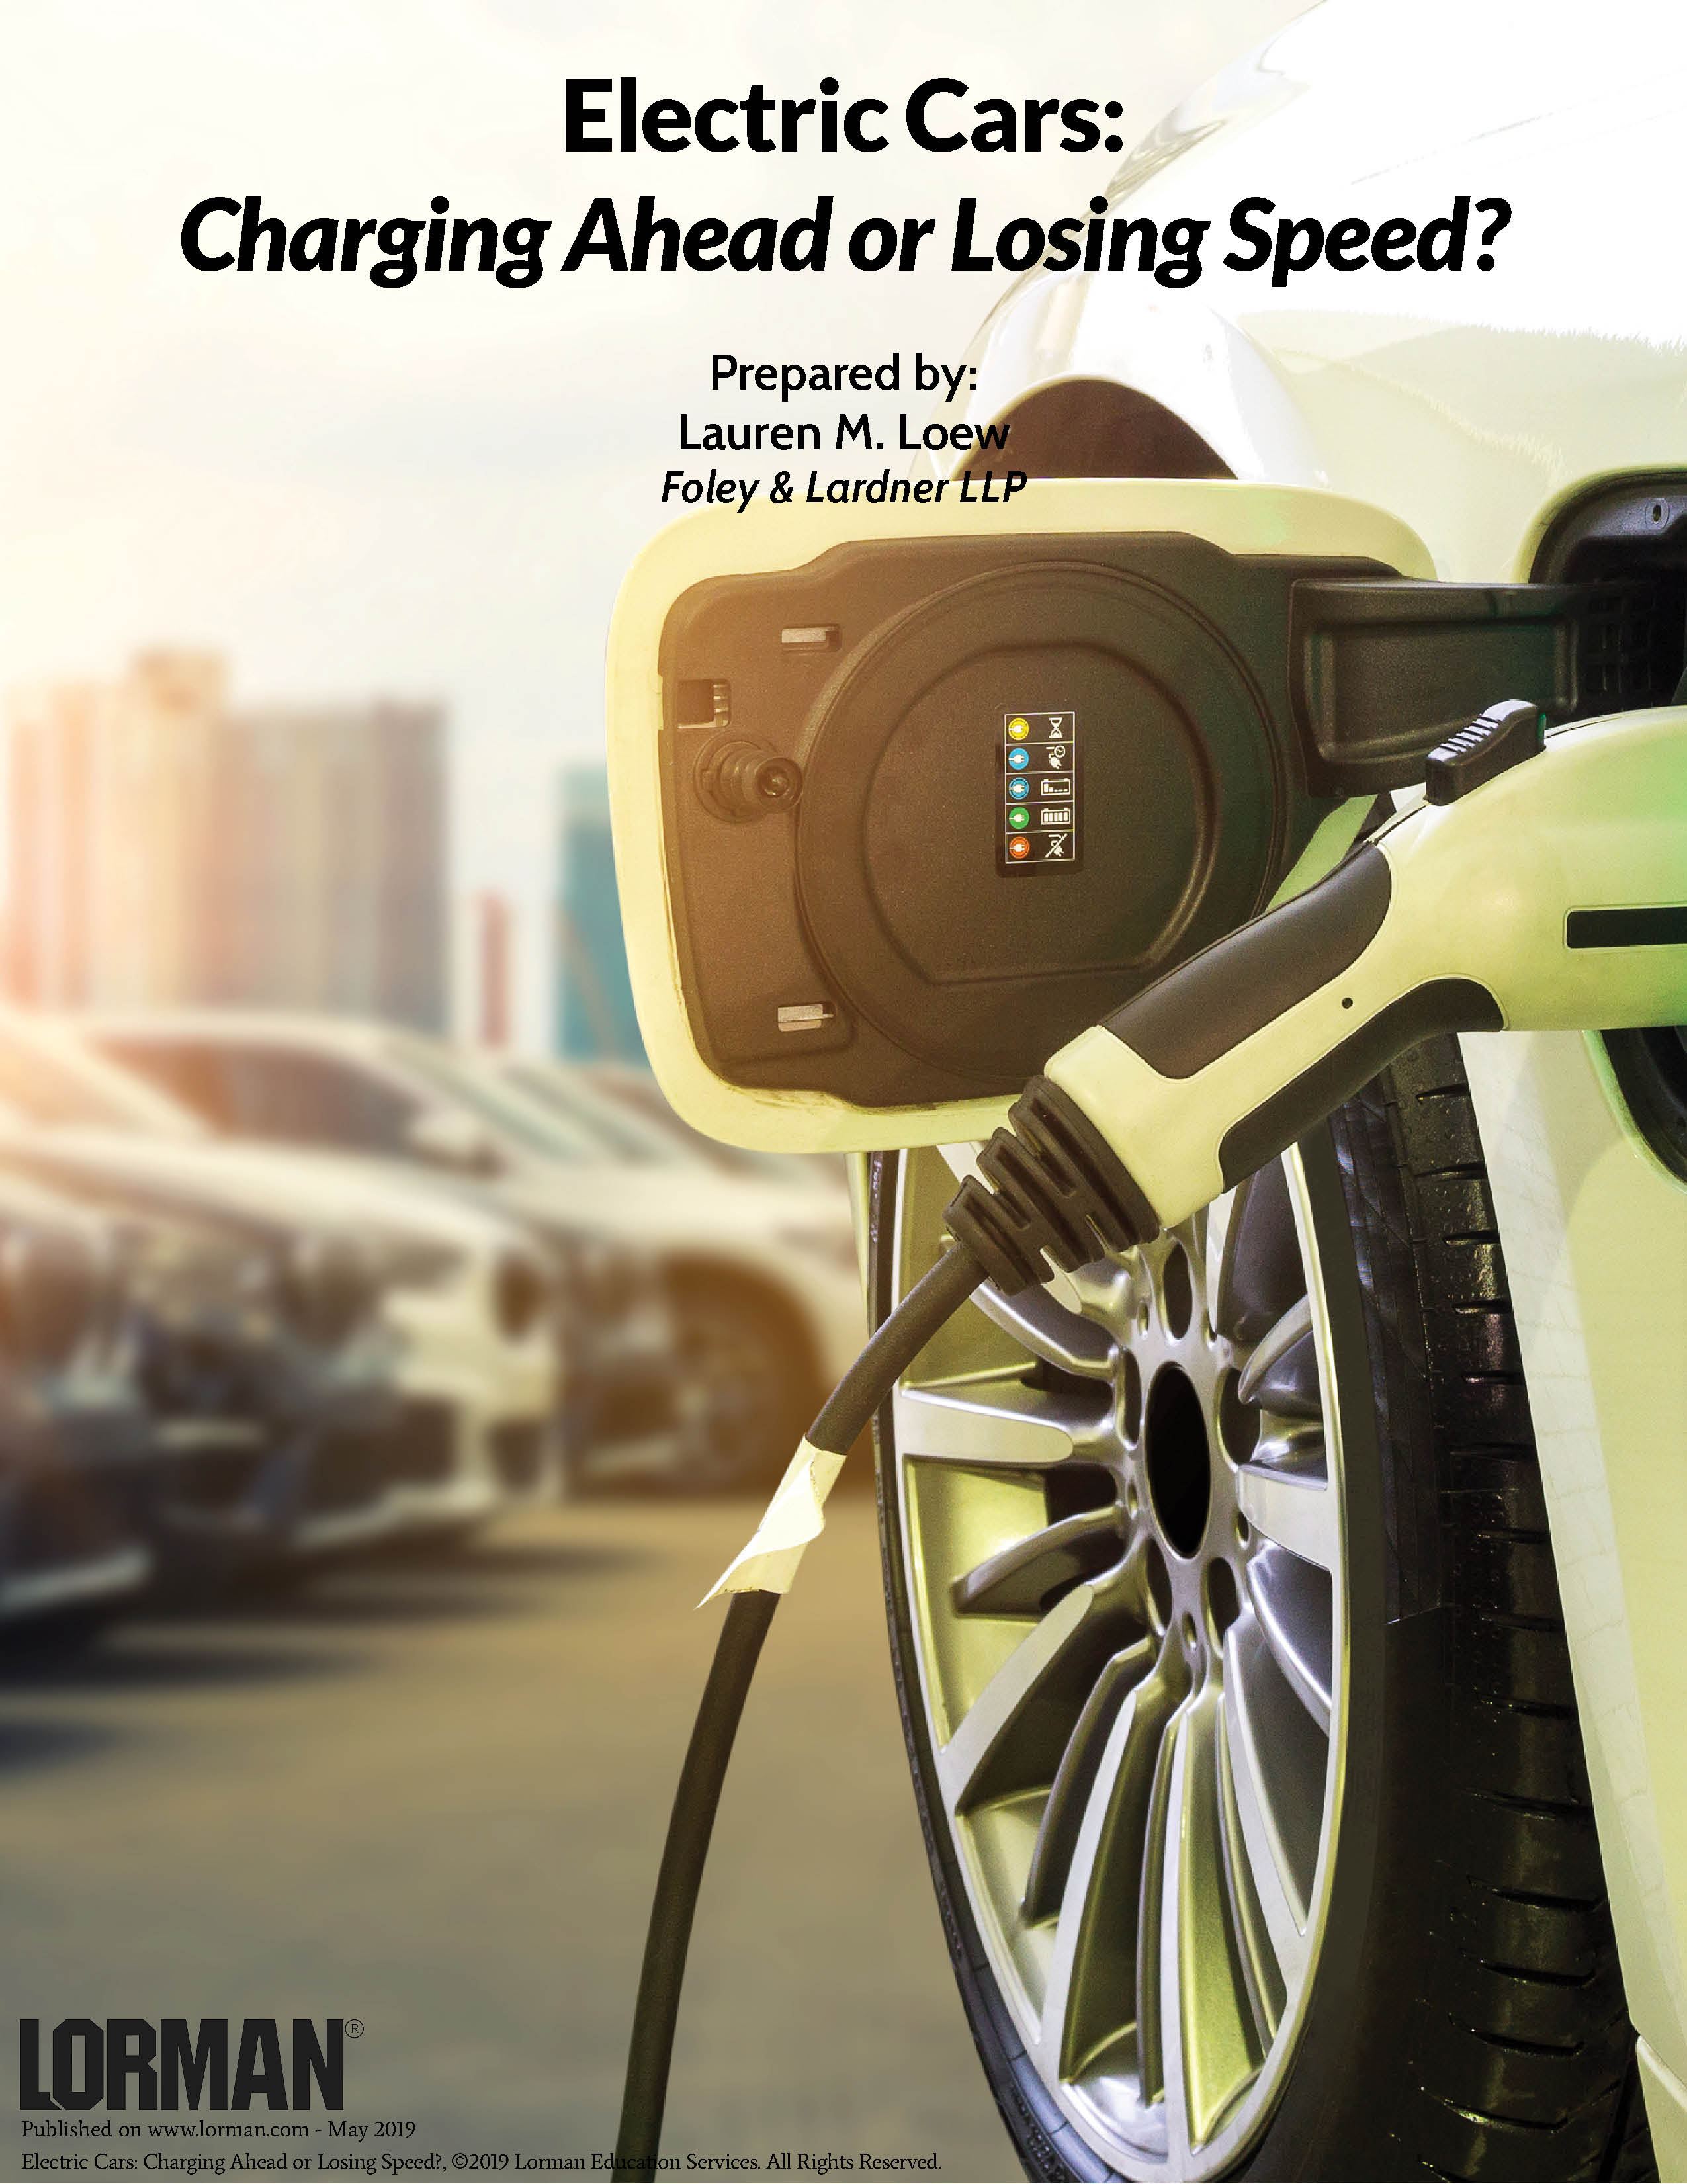 Electric Cars: Charging Ahead or Losing Speed?